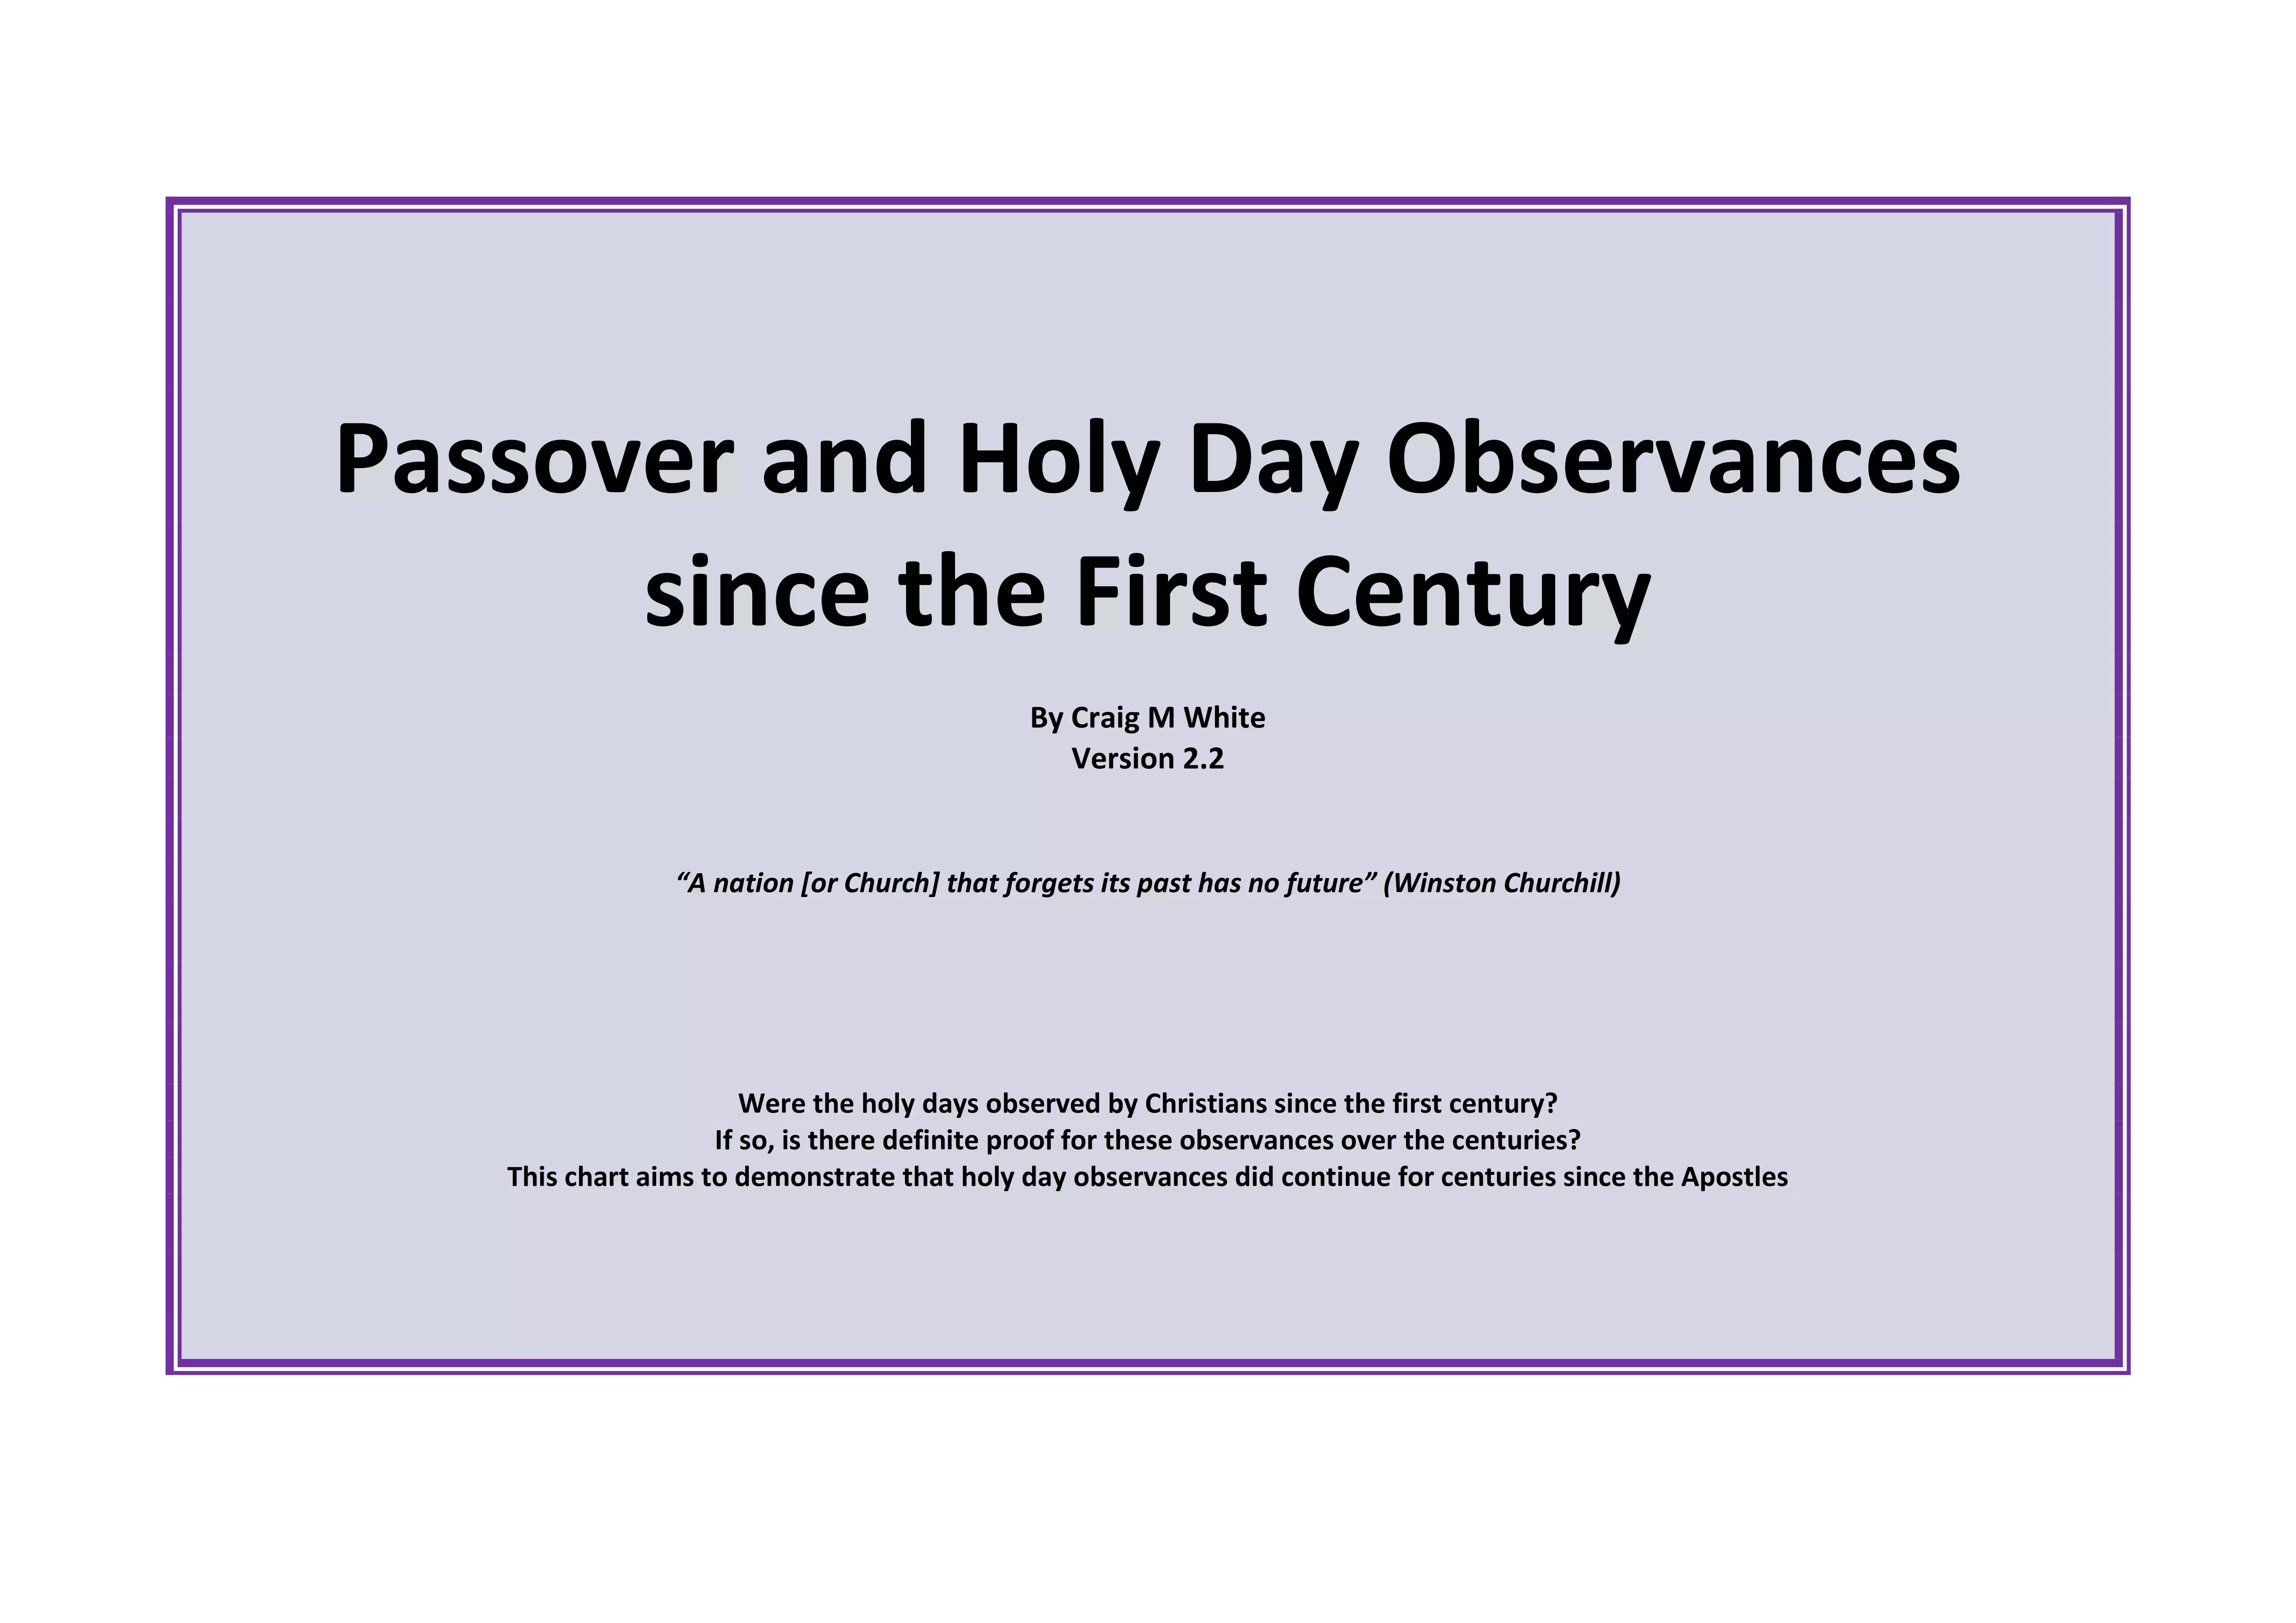 Passover & Holy Days since 1st century